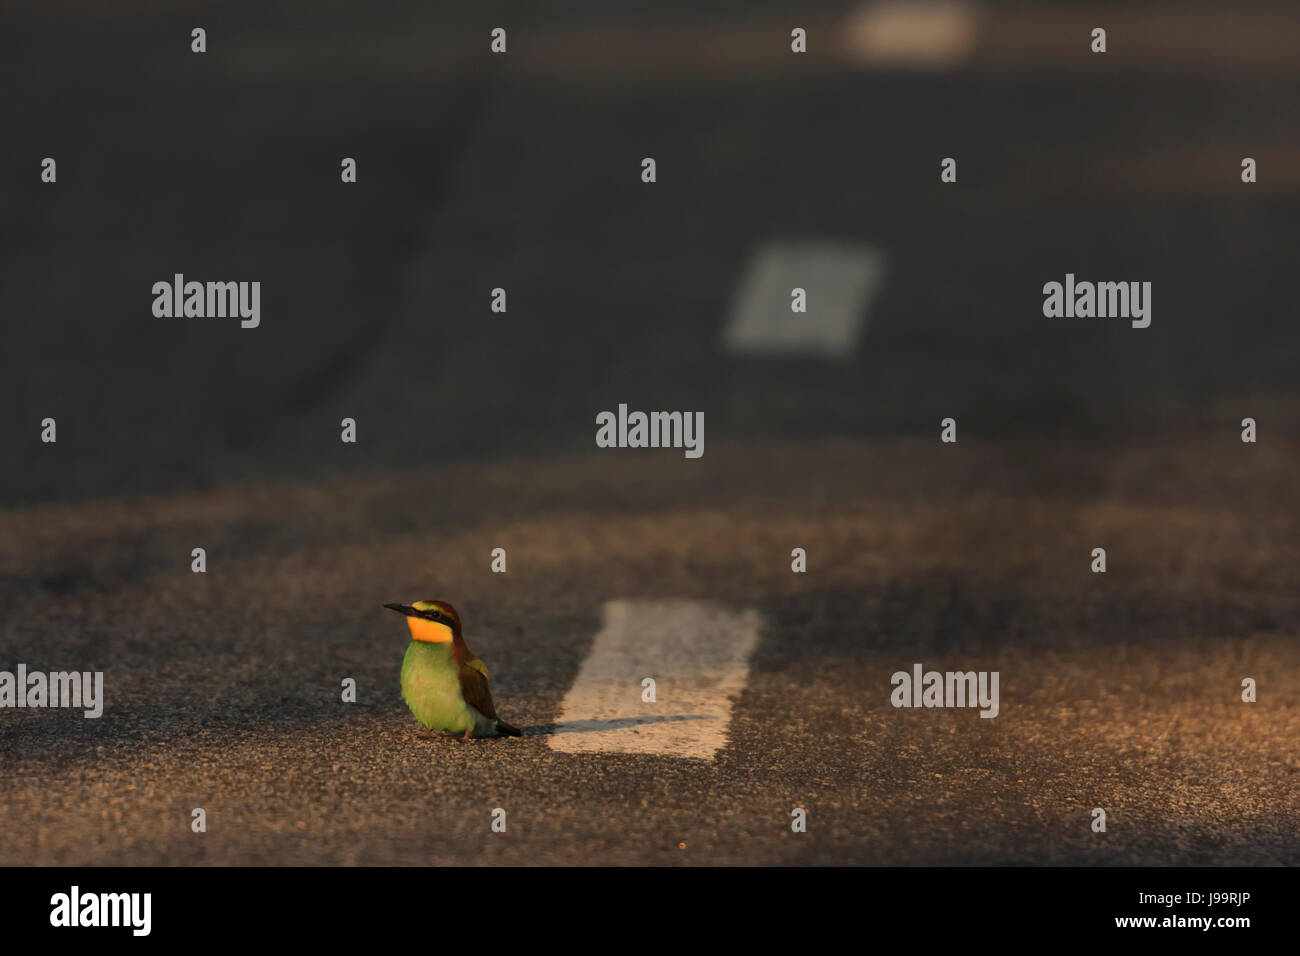 The European bee-eater (Merops apiaster) on a road near the lines  at dusk Stock Photo